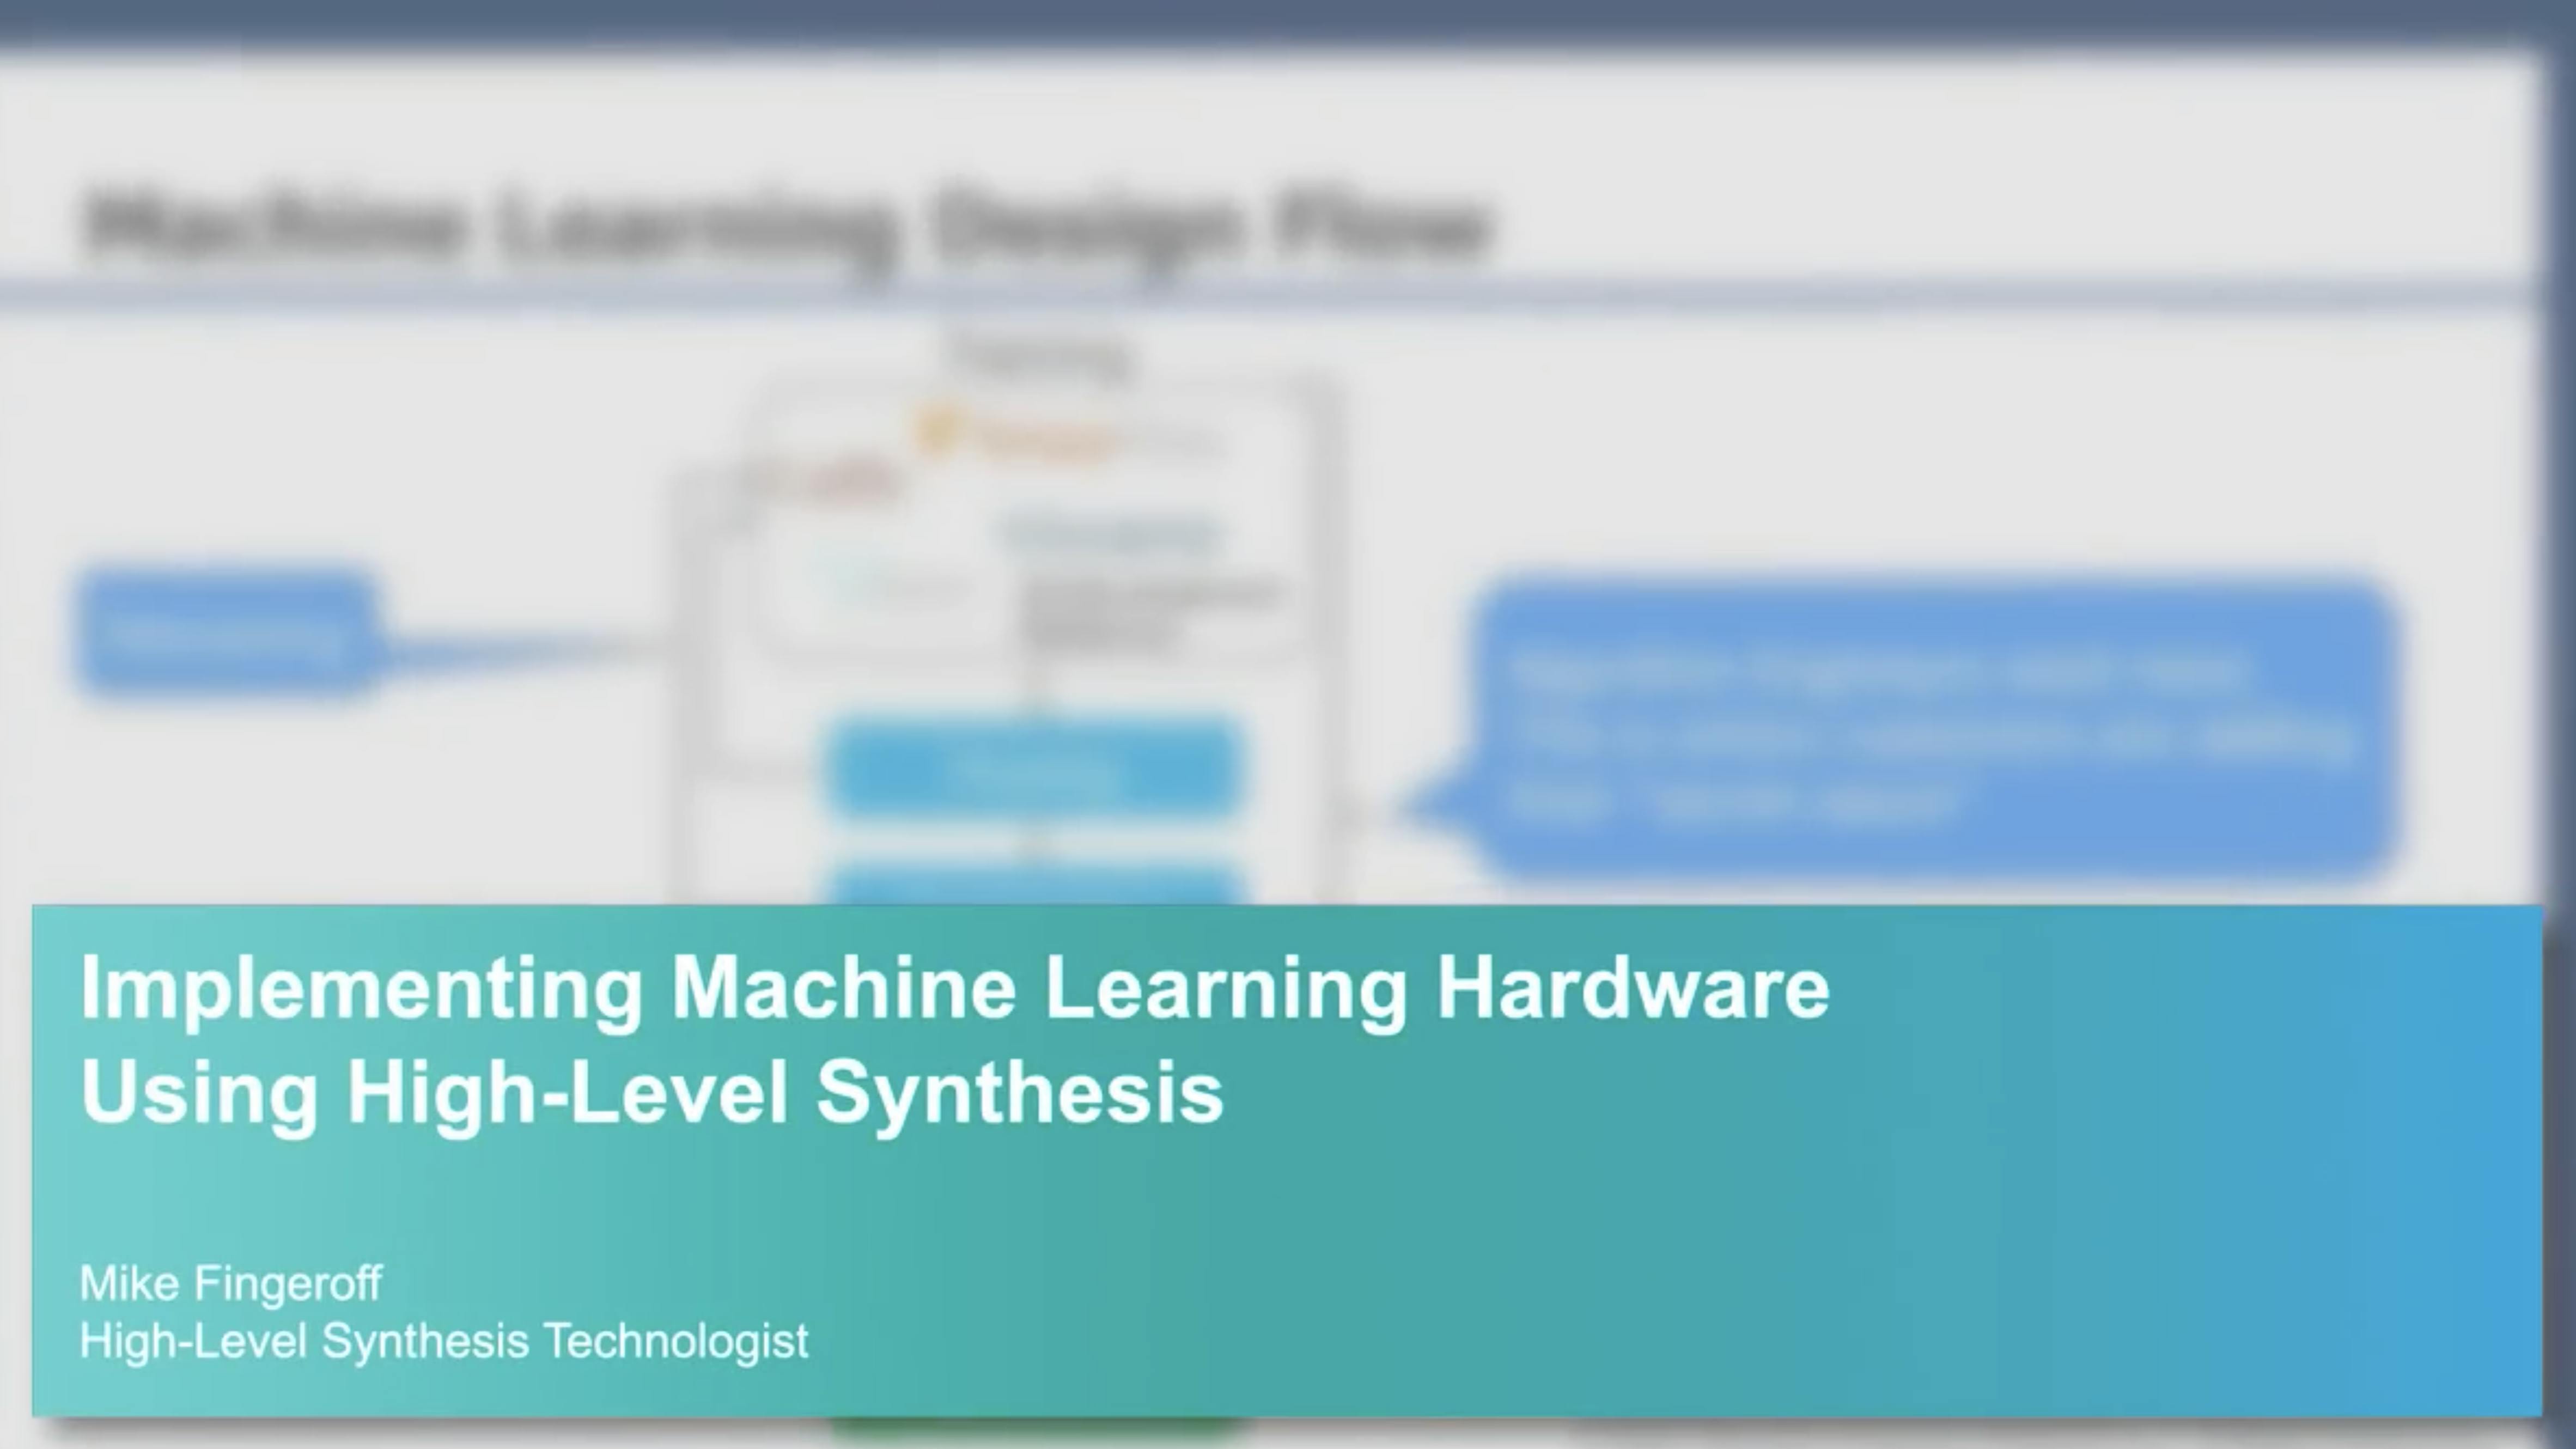 Implementing Machine Learning Hardware Using High-Level Synthesis